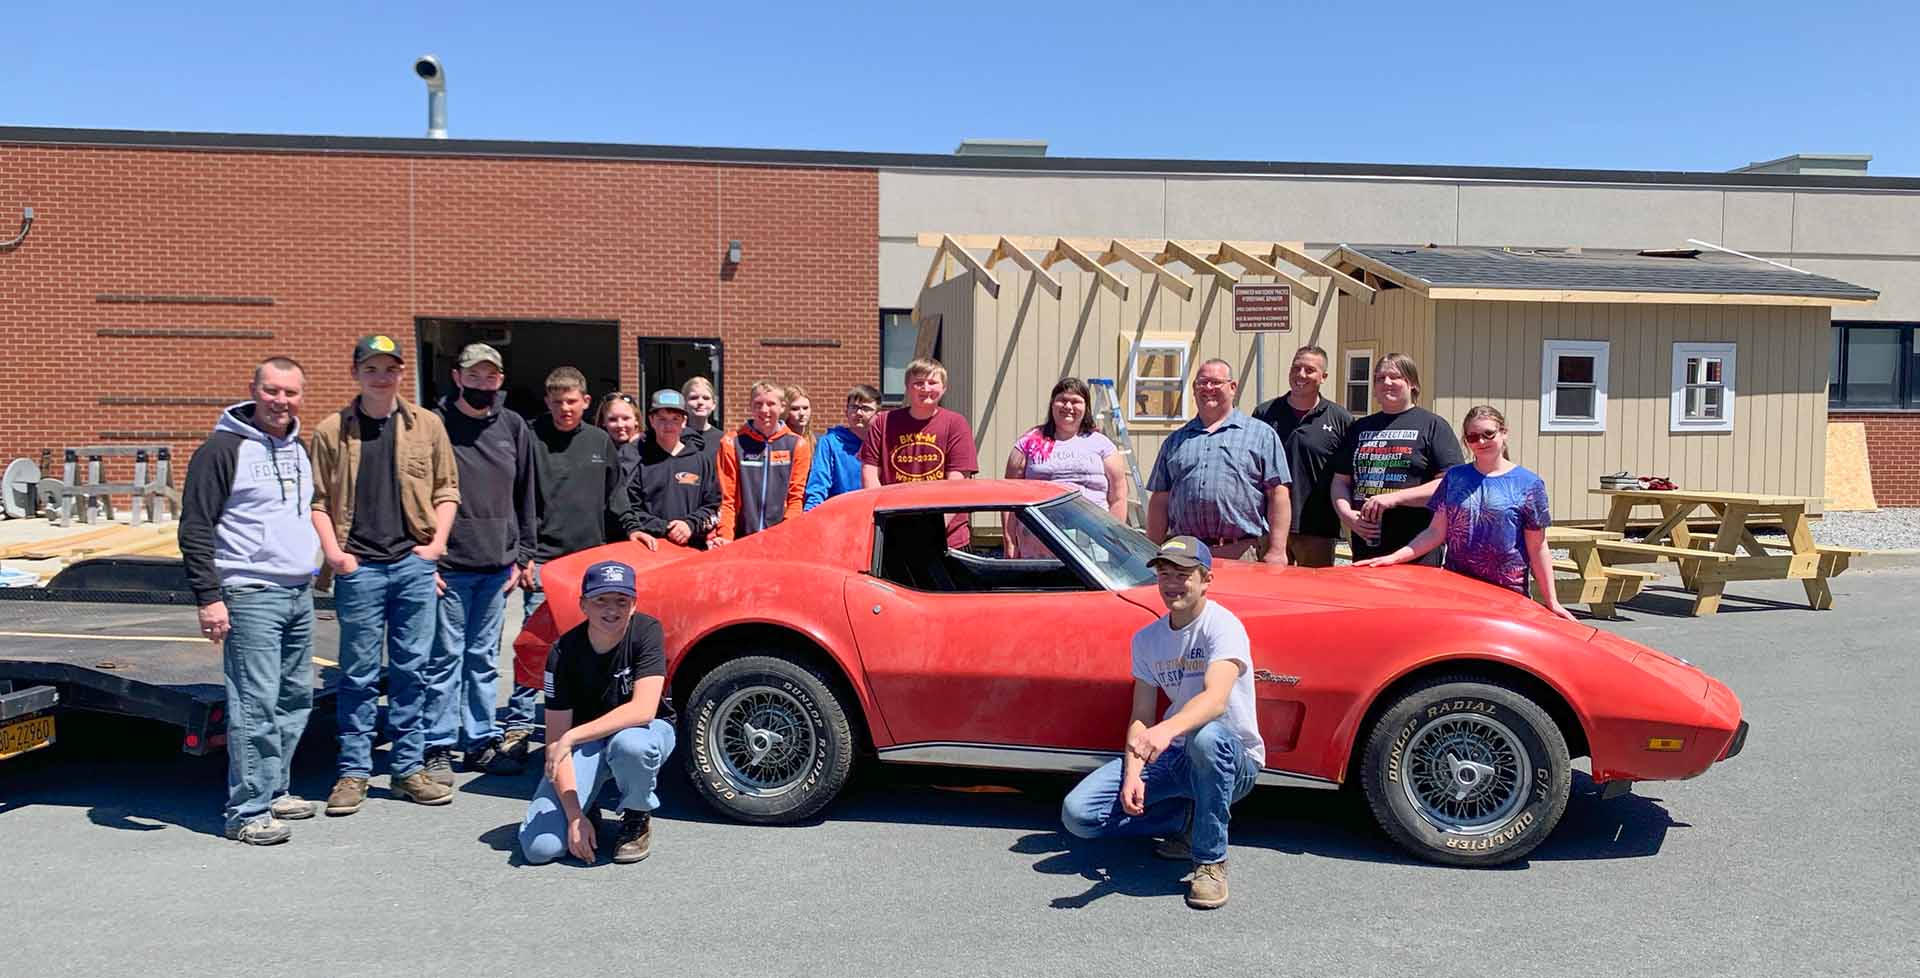 Berne-Knox-Westerlo CTE Teachers Josh Baker (fourth from right) and Bill Dergosits (third from right) with their students. The class is using their training to restore the 1976 Corvette Stringray, which will be auctioned off to raise funds for the district’s growing CTE program.